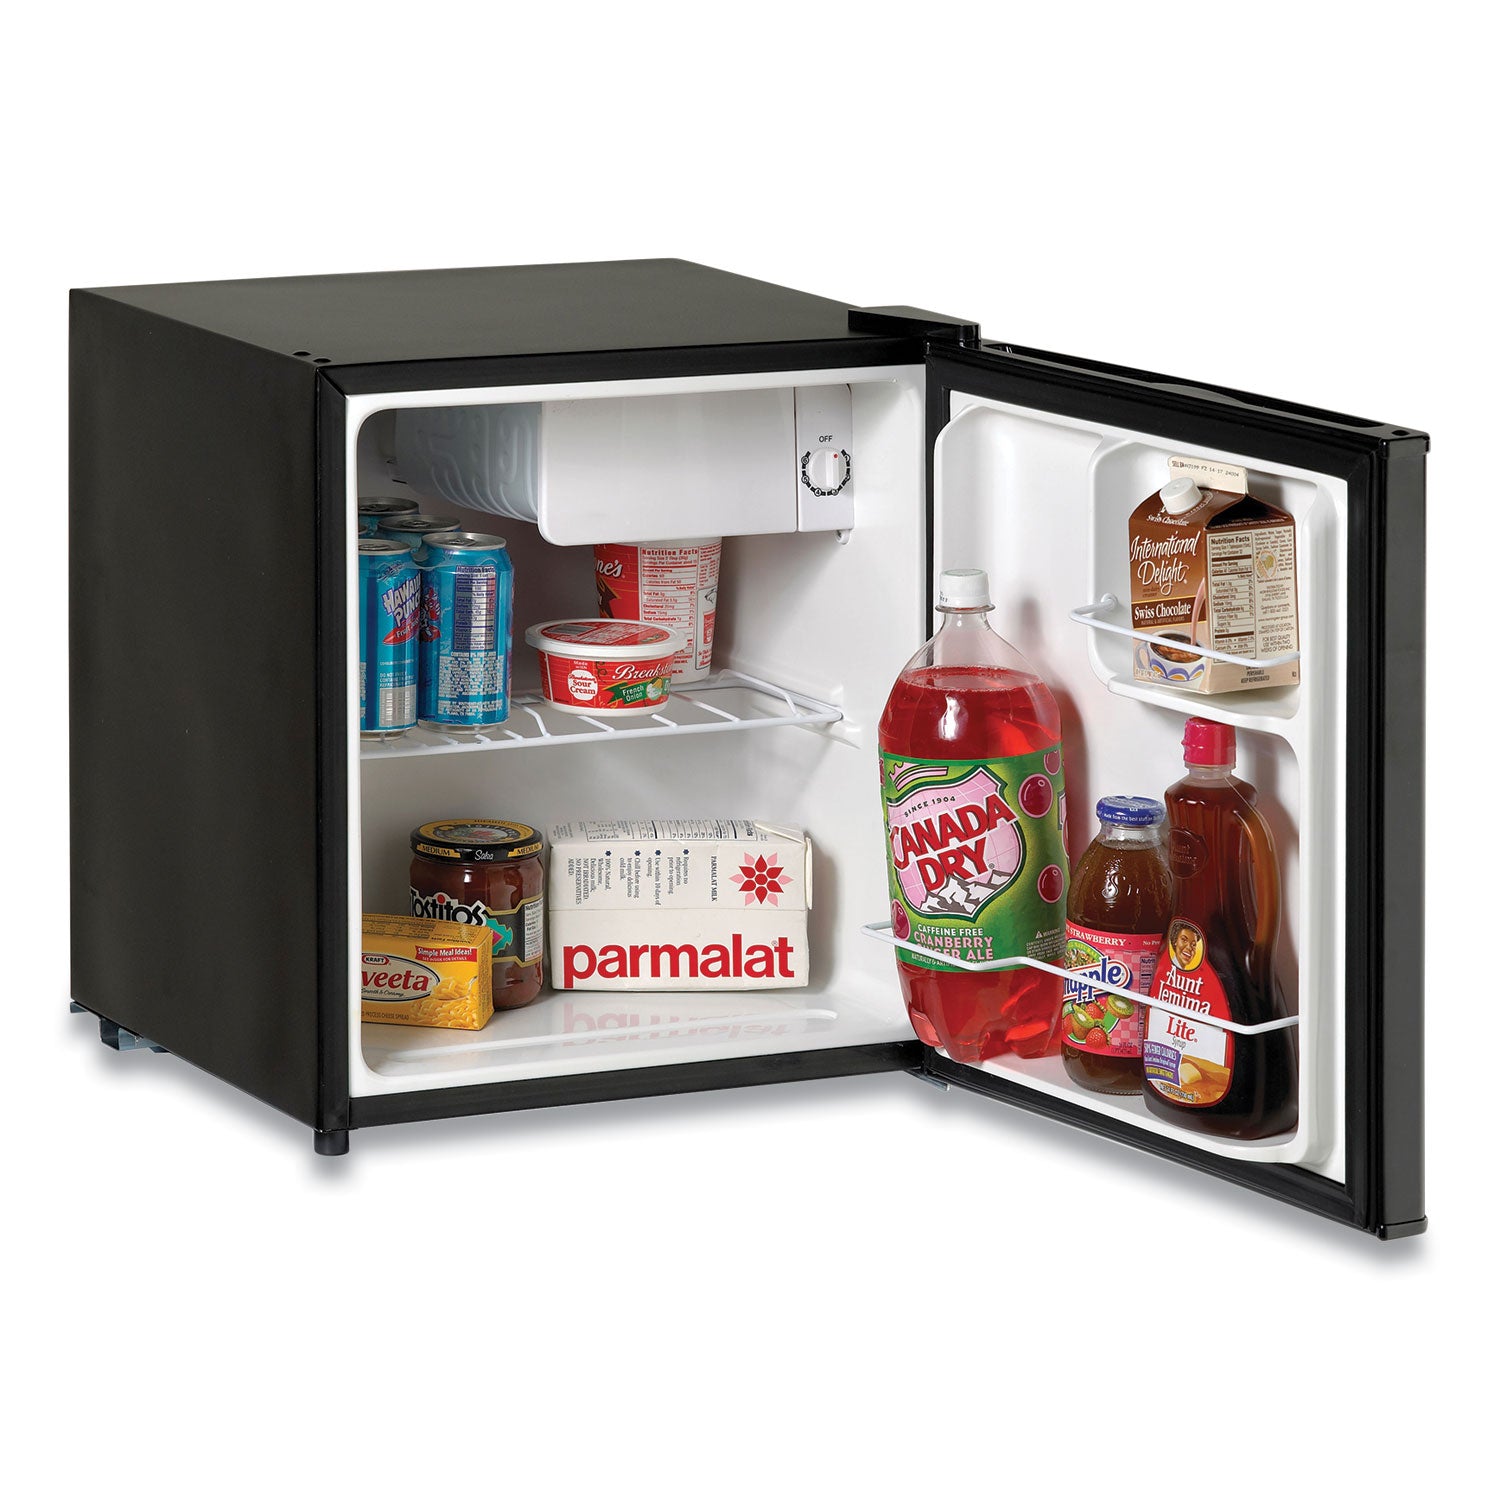 Avanti 1.7 Cubic Ft. Compact Refrigerator with Chiller Compartment, Black Flipcost Flipcost